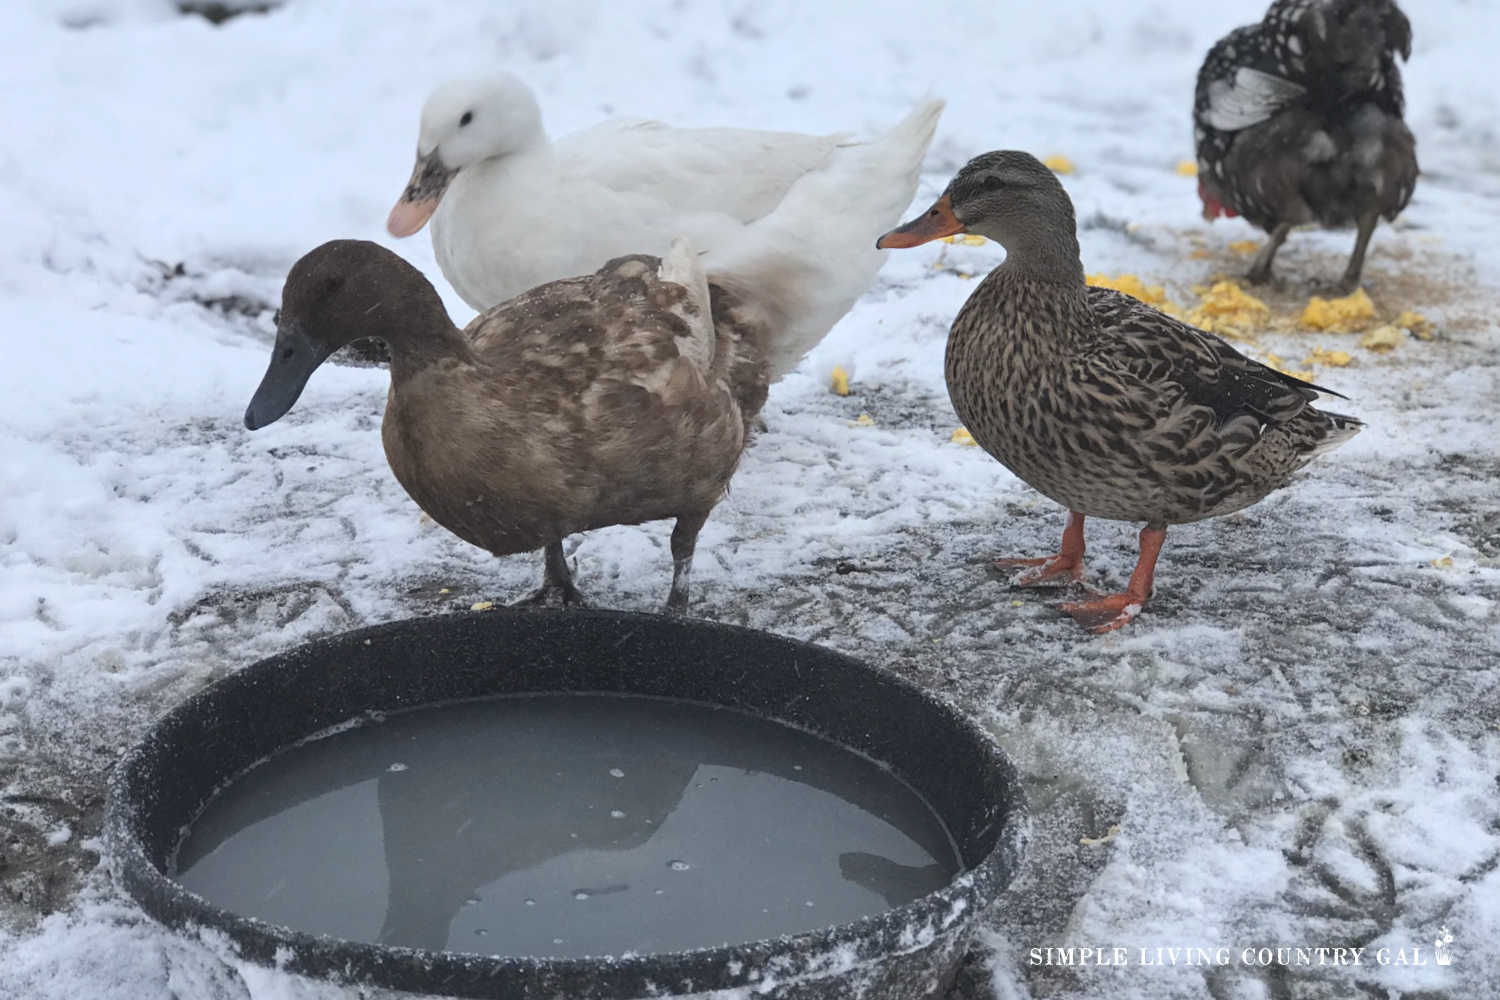 Keep your ducks healthy and happy this winter with a simple winter duck care checklist